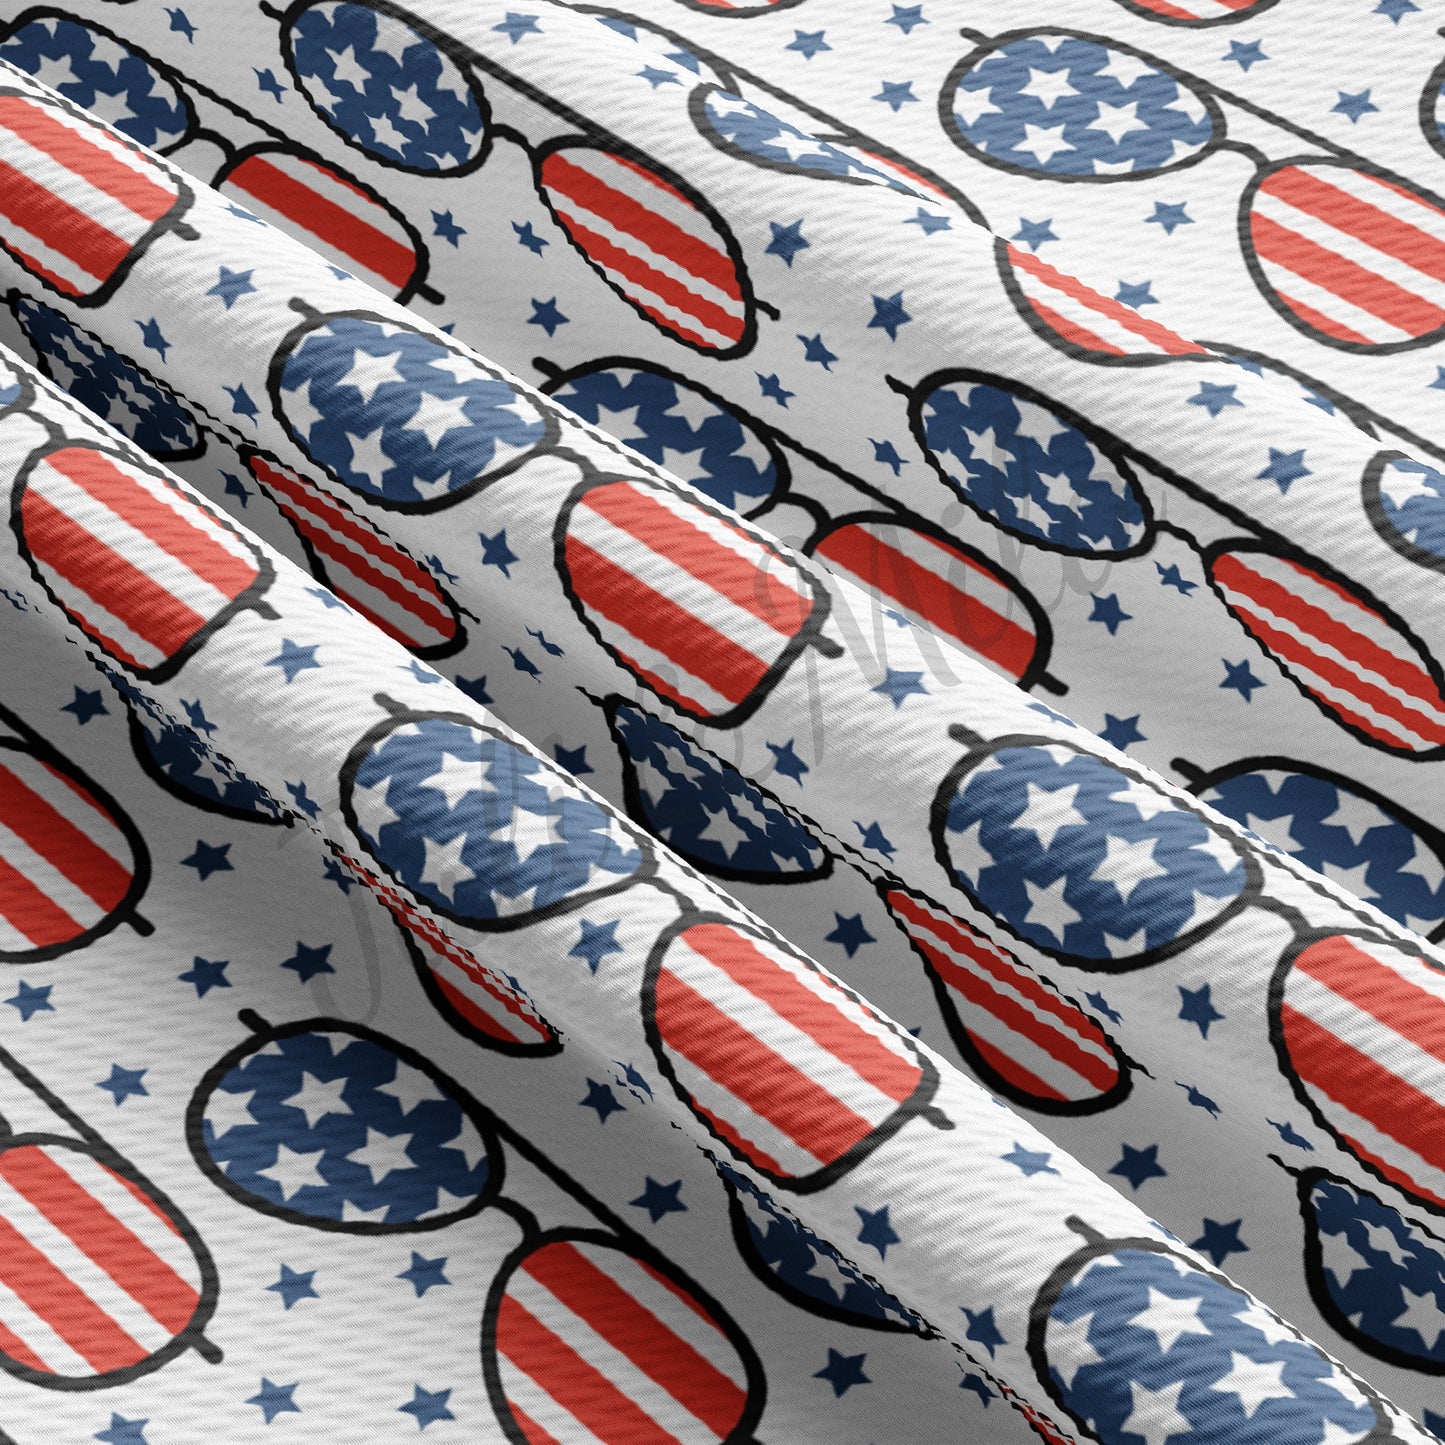 4th of July Patriotic USA Bullet Fabric PT85